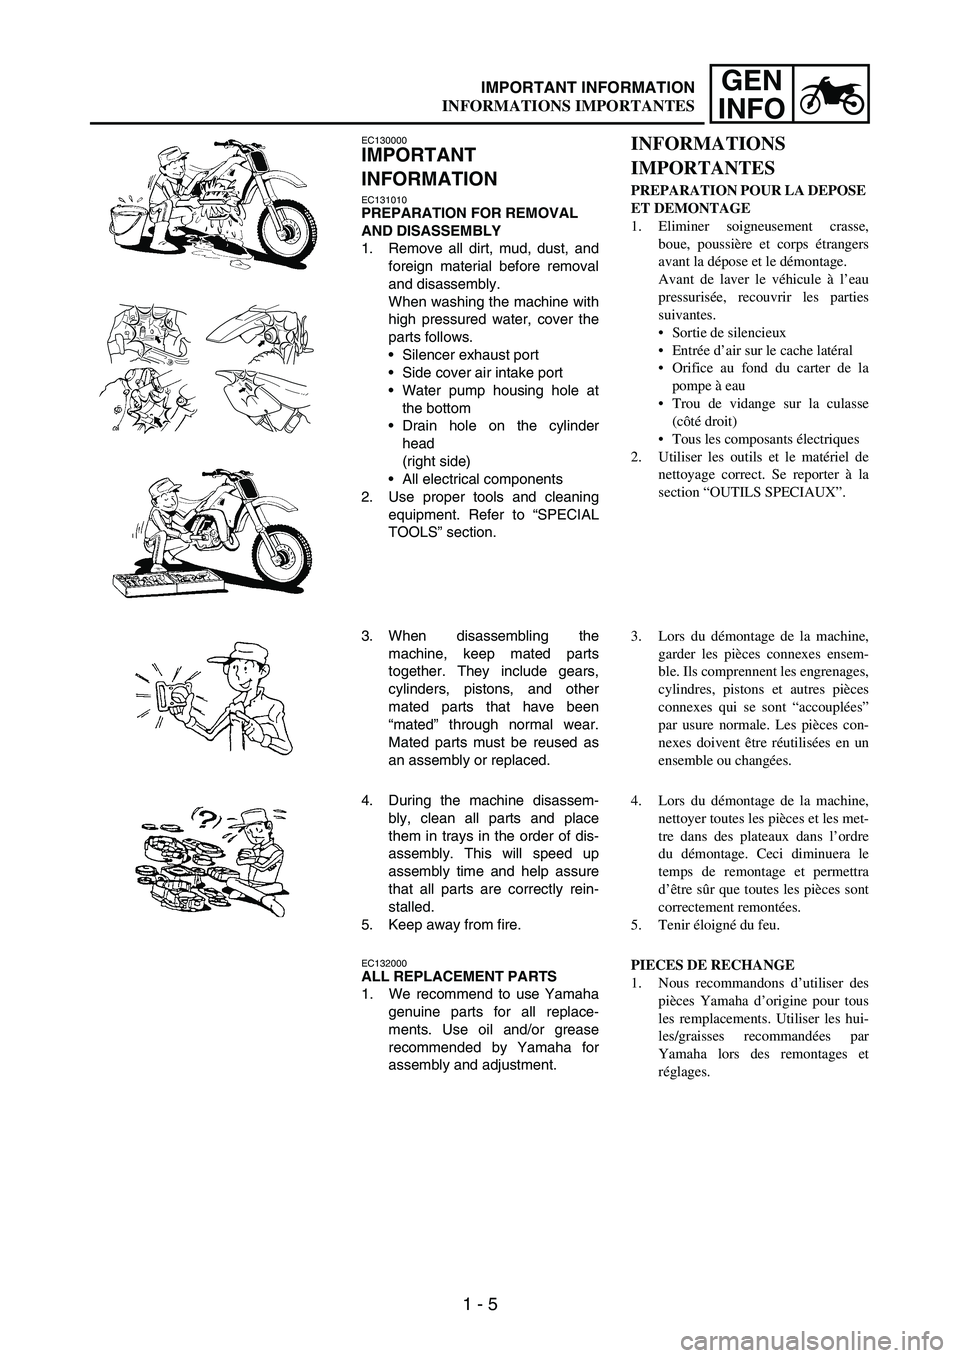 YAMAHA WR 250F 2004  Manuale duso (in Italian) 1 - 5
GEN
INFOIMPORTANT INFORMATION
EC130000
IMPORTANT 
INFORMATION
EC131010PREPARATION FOR REMOVAL 
AND DISASSEMBLY
1. Remove all dirt, mud, dust, and
foreign material before removal
and disassembly.